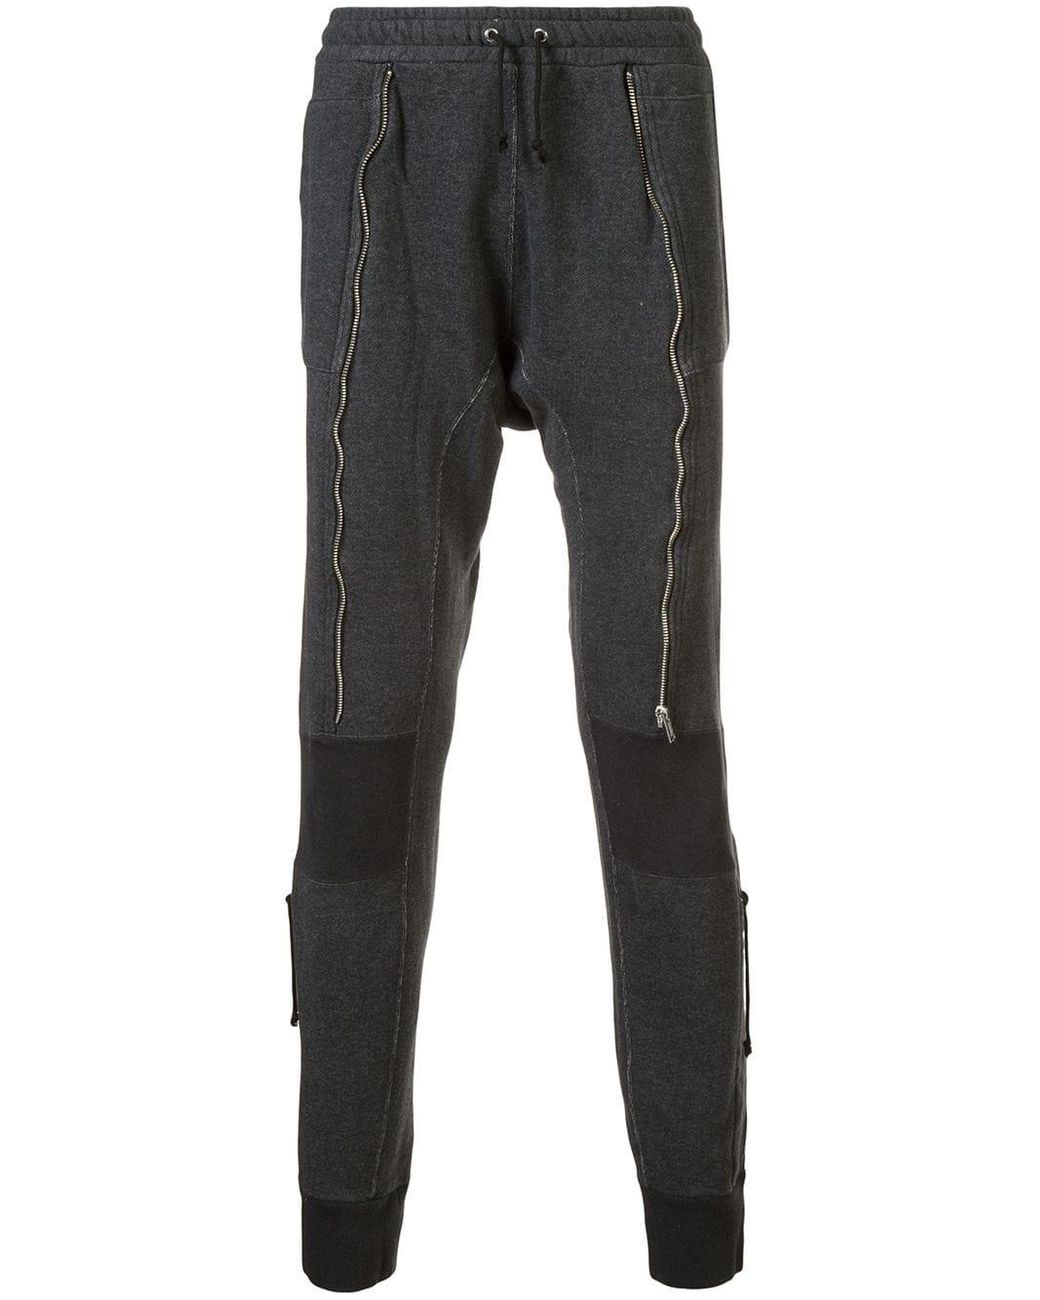 Undercover Cotton Drawstring Track Pants in Grey (Gray) for Men - Lyst